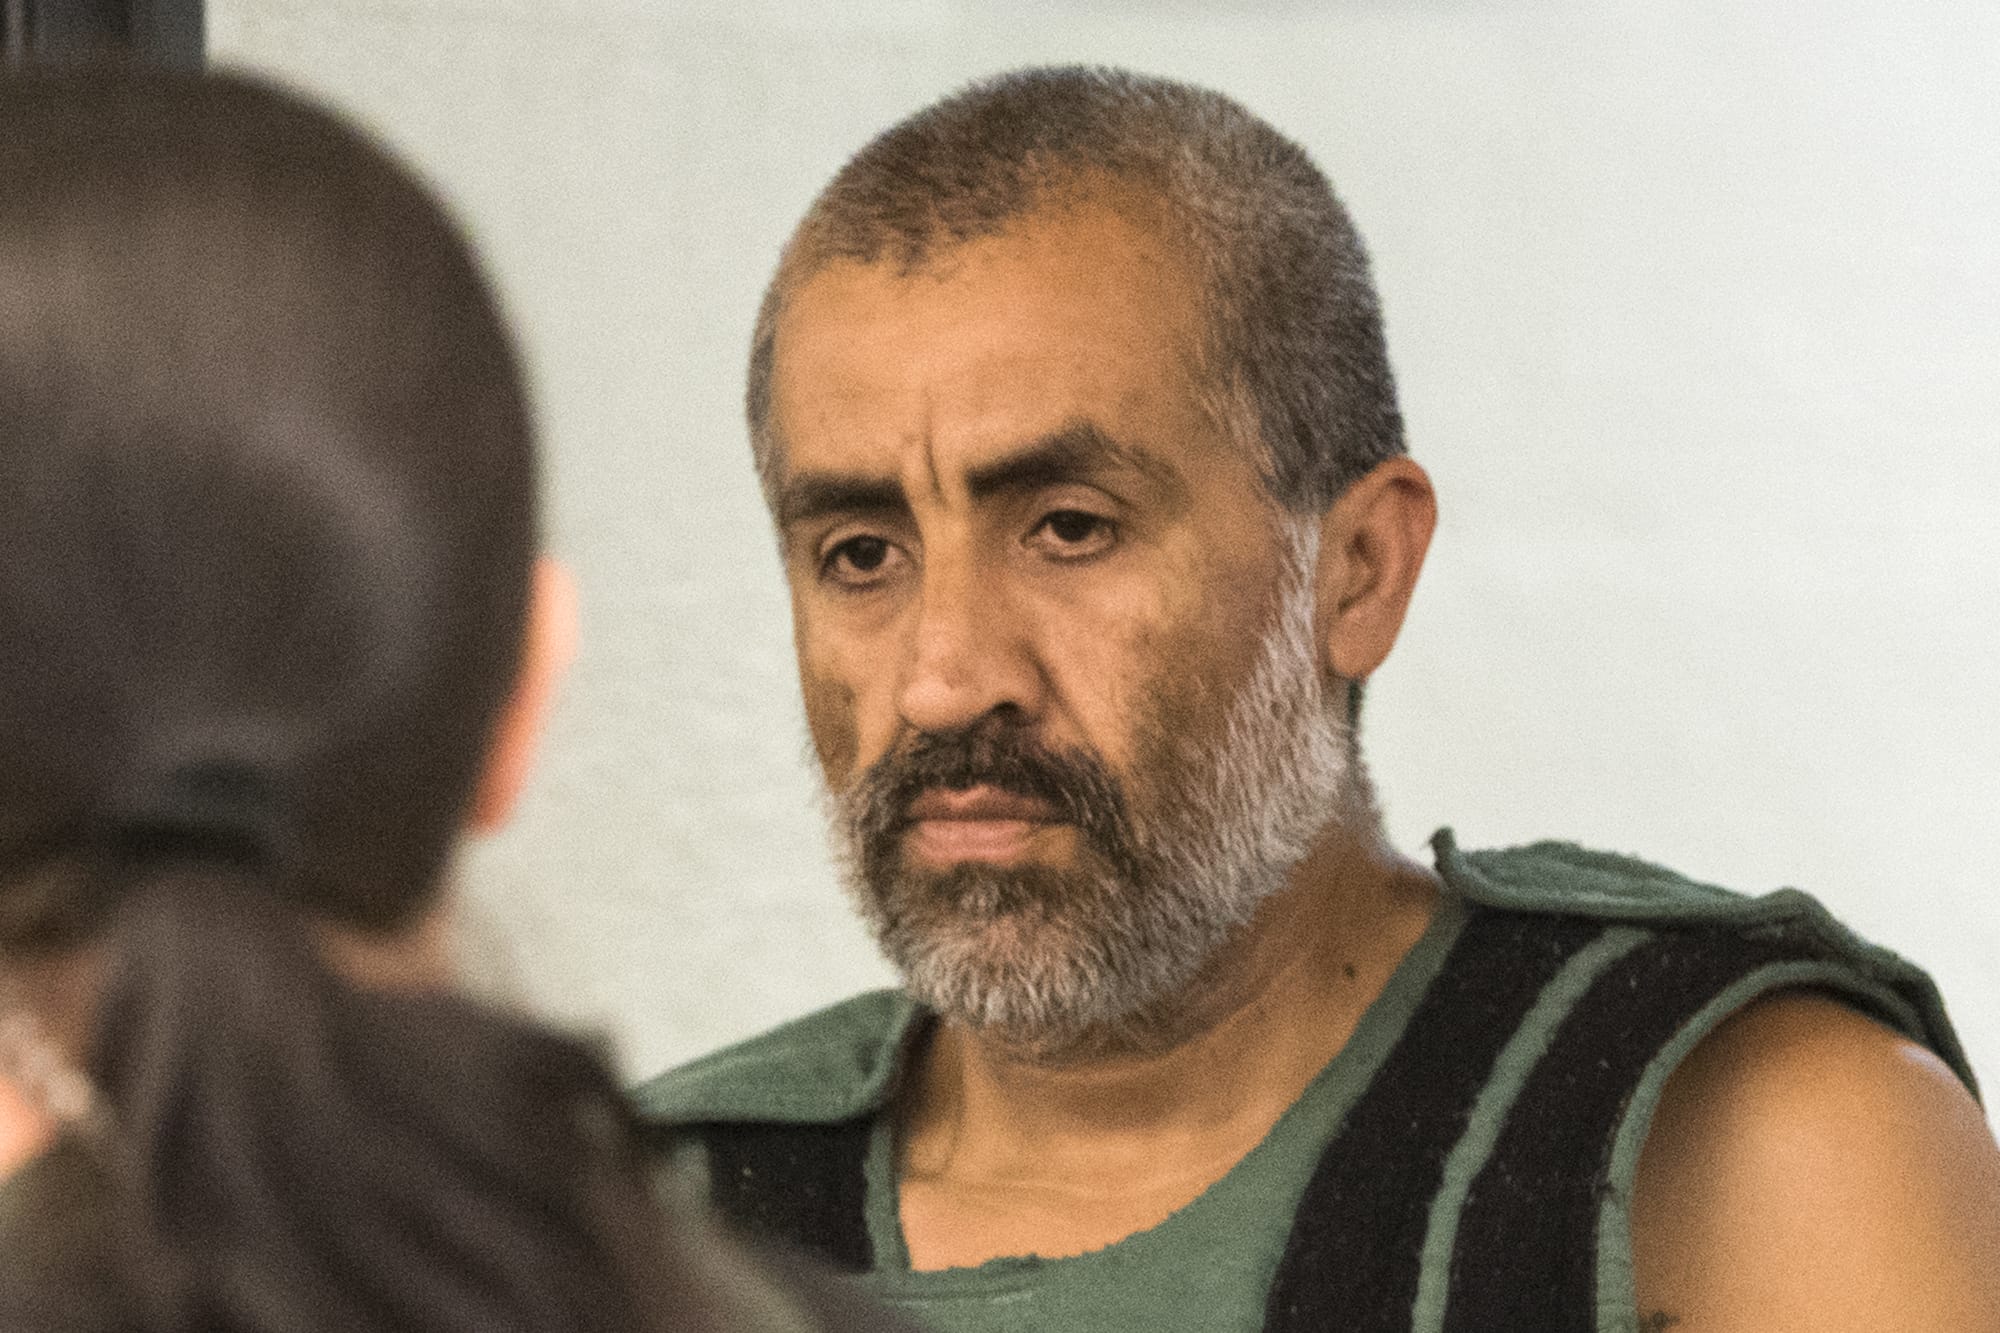 Raul Flores makes a first appearance Friday morning, June 29, 2018, in Clark County Superior Court in Vancouver.